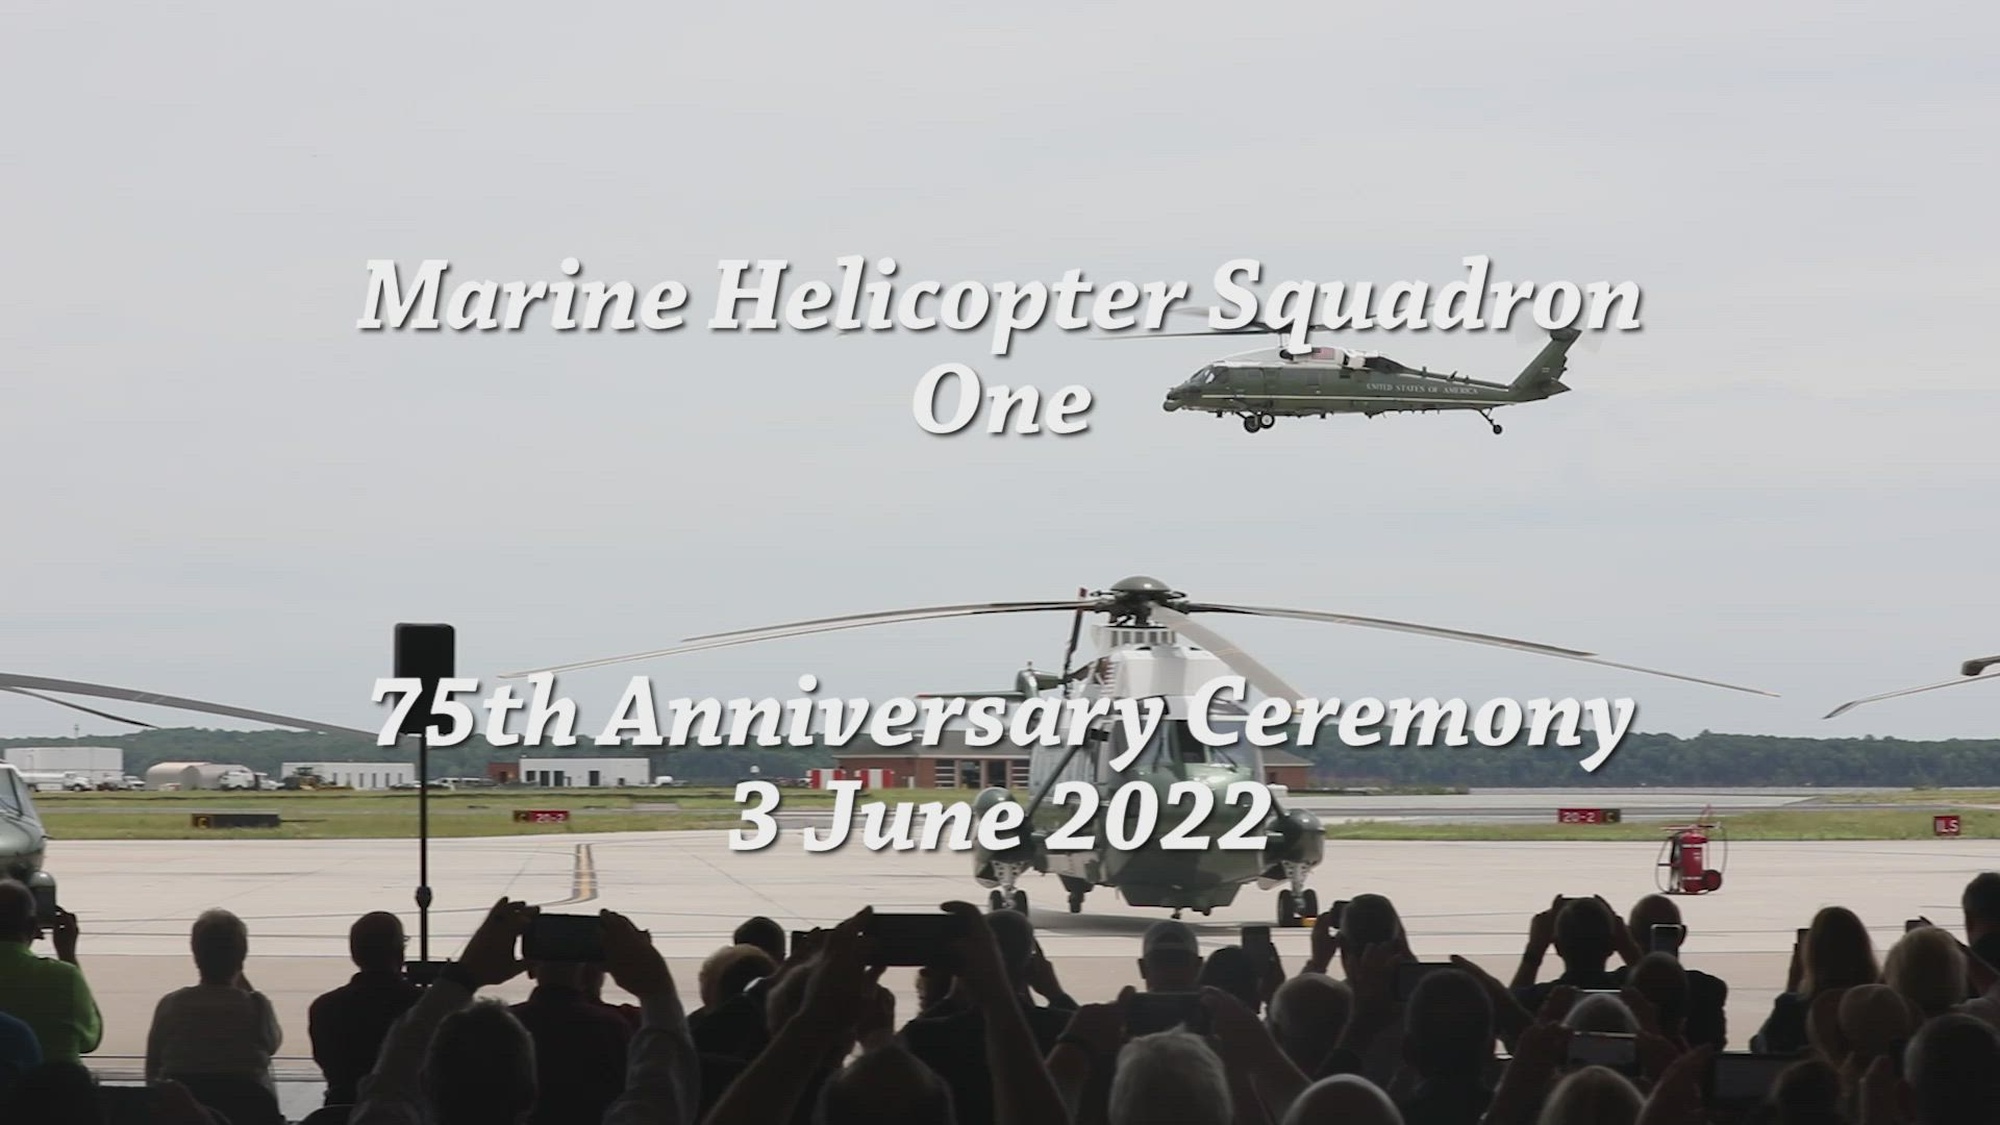 U.S. service members, veterans and civilian employees attend the Marine Corps Helicopter Squadron One (HMX-1) 75th Anniversary Reunion on Marine Corps Base Quantico, Virginia, June 3, 2022. The reunion commemorates the squadron’s accomplished history and lineage, as well as offering an opportunity for prior members to connect with old friends and new members. HMX-1 was established Dec. 1, 1947 as an experimental unit tasked with testing and evaluating military helicopters when rotary wing flight was still in its infancy. (U.S. Marine Corps video by Sgt. Quang Do)